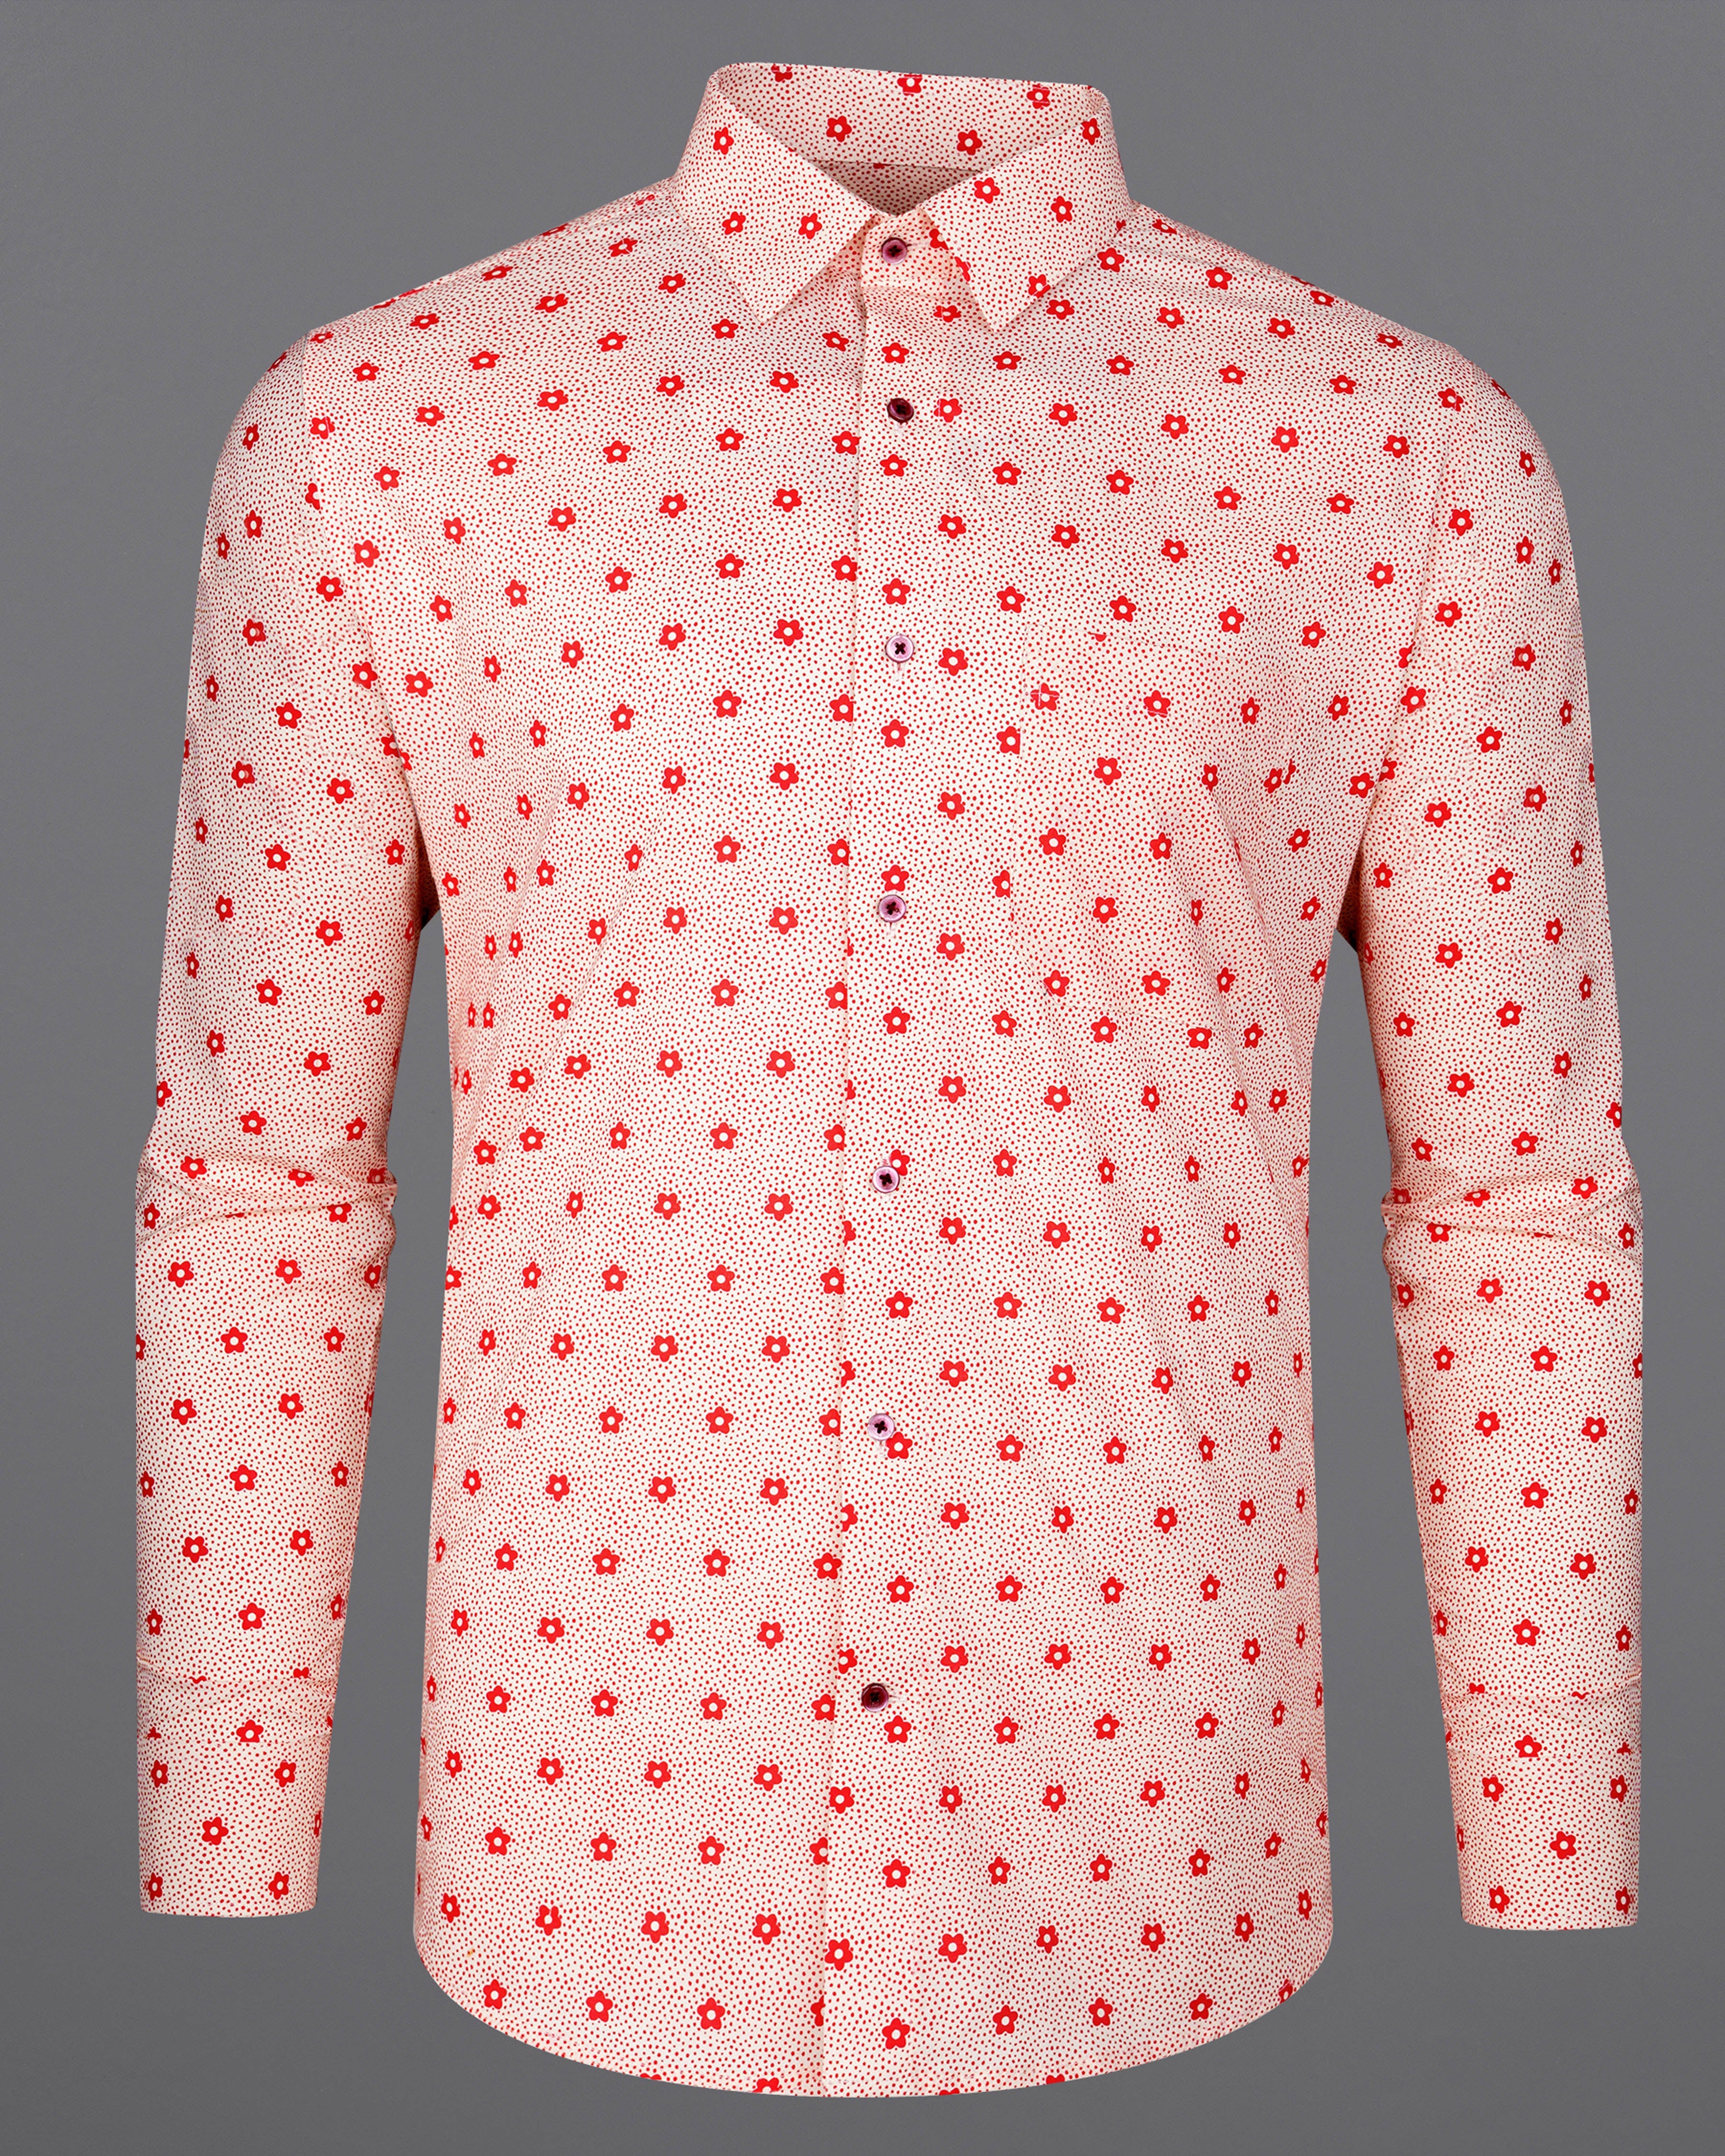 Albescent Peach with Jasper Red Ditsy Printed Printed Premium Cotton Shirt 8255-MN-38, 8255-MN-H-38, 8255-MN-39, 8255-MN-H-39, 8255-MN-40, 8255-MN-H-40, 8255-MN-42, 8255-MN-H-42, 8255-MN-44, 8255-MN-H-44, 8255-MN-46, 8255-MN-H-46, 8255-MN-48, 8255-MN-H-48, 8255-MN-50, 8255-MN-H-50, 8255-MN-52, 8255-MN-H-52